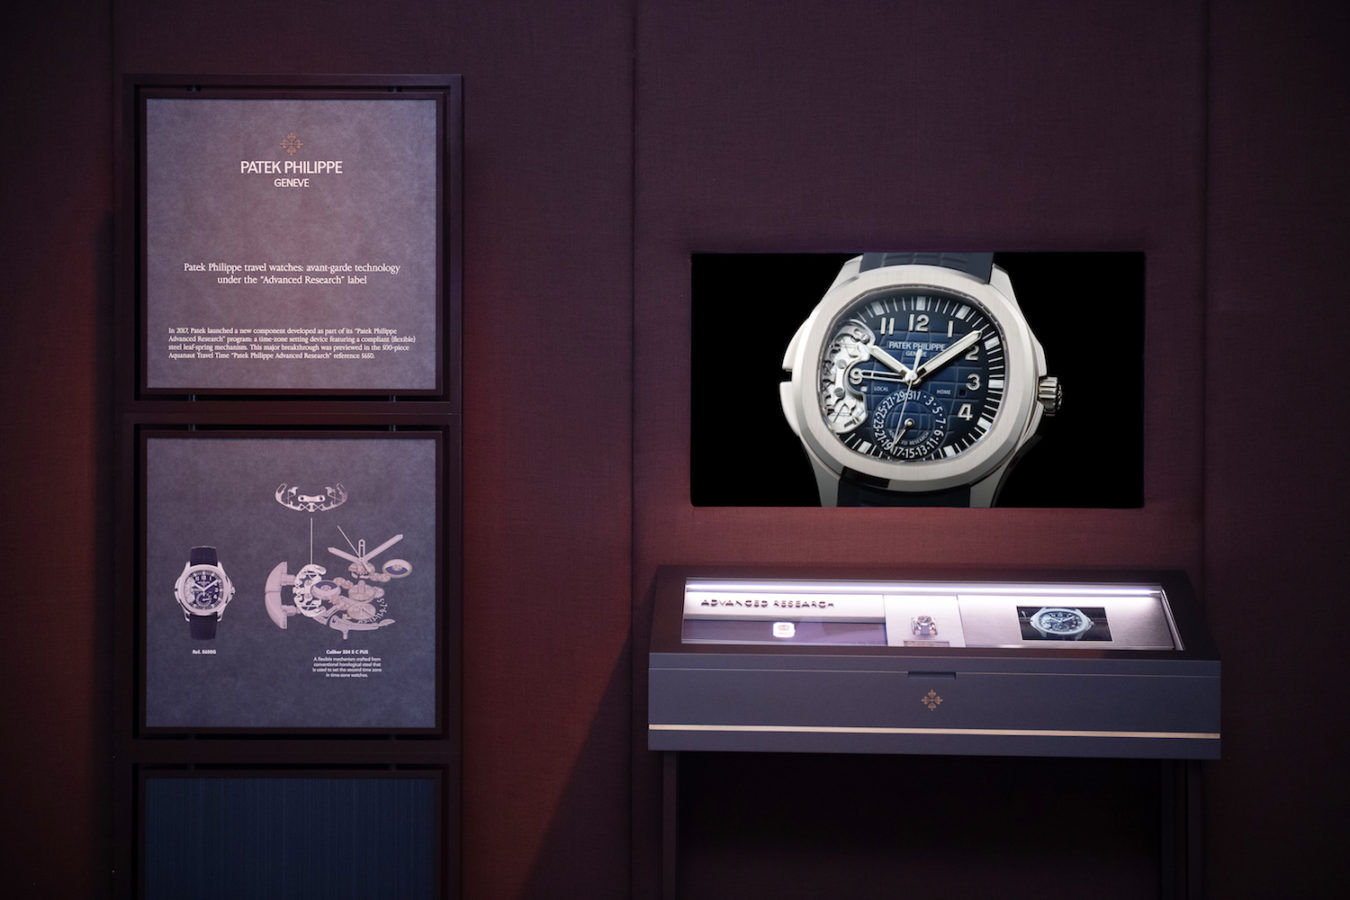 Patek Philippe’s Exhibition Takes Guests Through the History of World Time